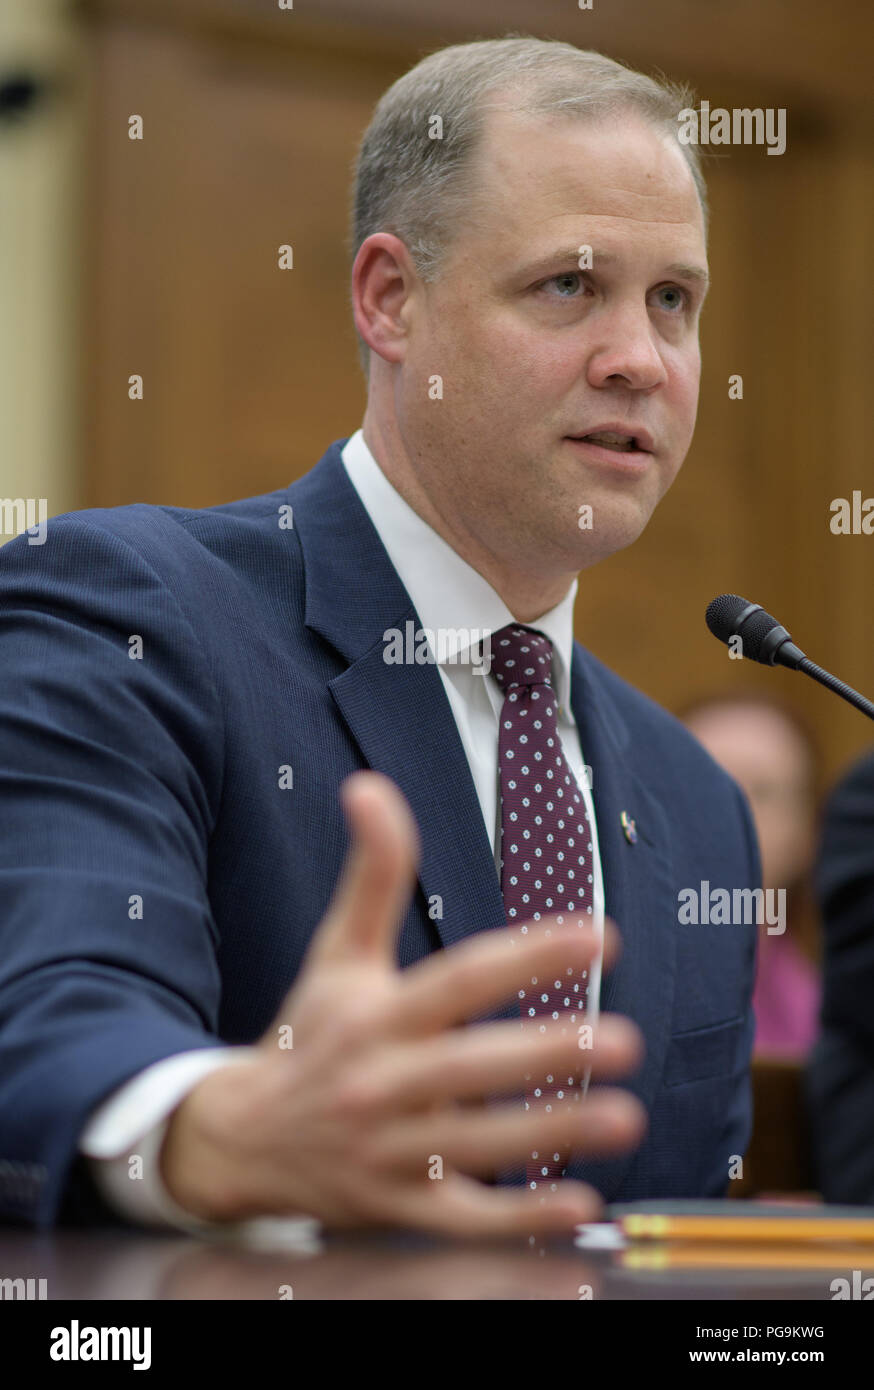 NASA Administrator Jim Bridenstine testifies before the House Committee on Science, Space, and Technology during a hearing on the James Webb Space Telescope, Wednesday, July 25, 2018 at the Rayburn House Office Building in Washington. Stock Photo